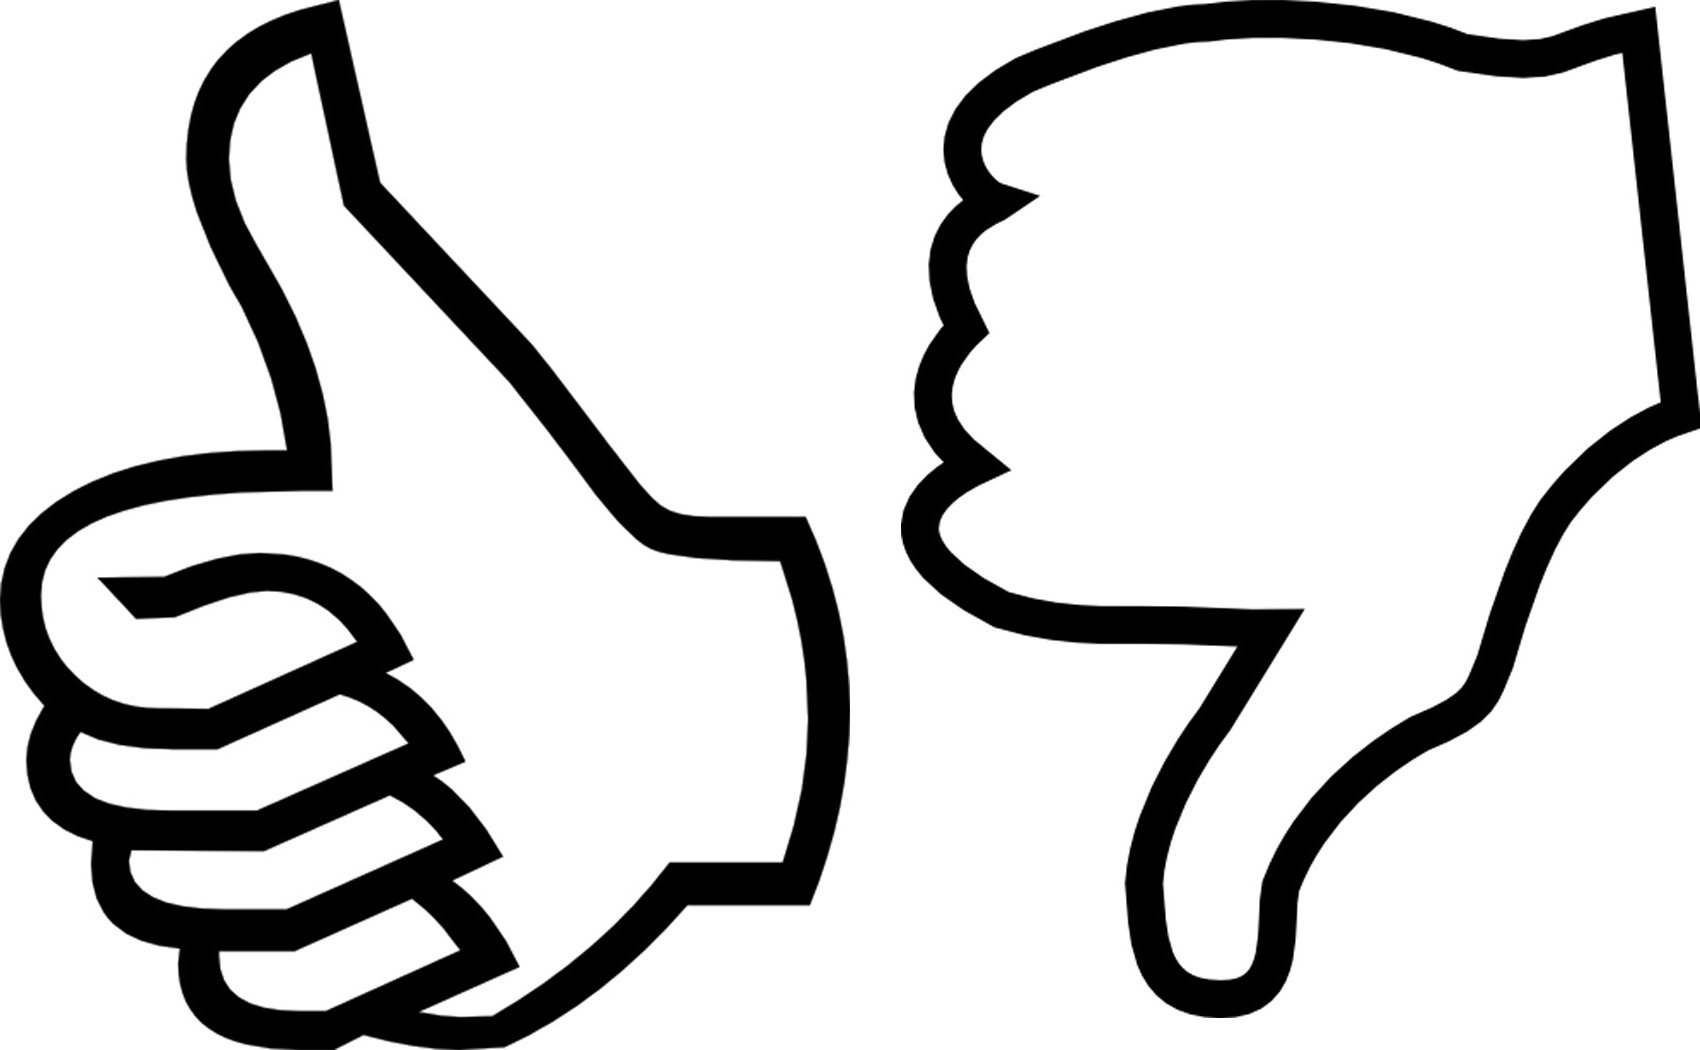 Black And White Thumbs Up - ClipArt Best